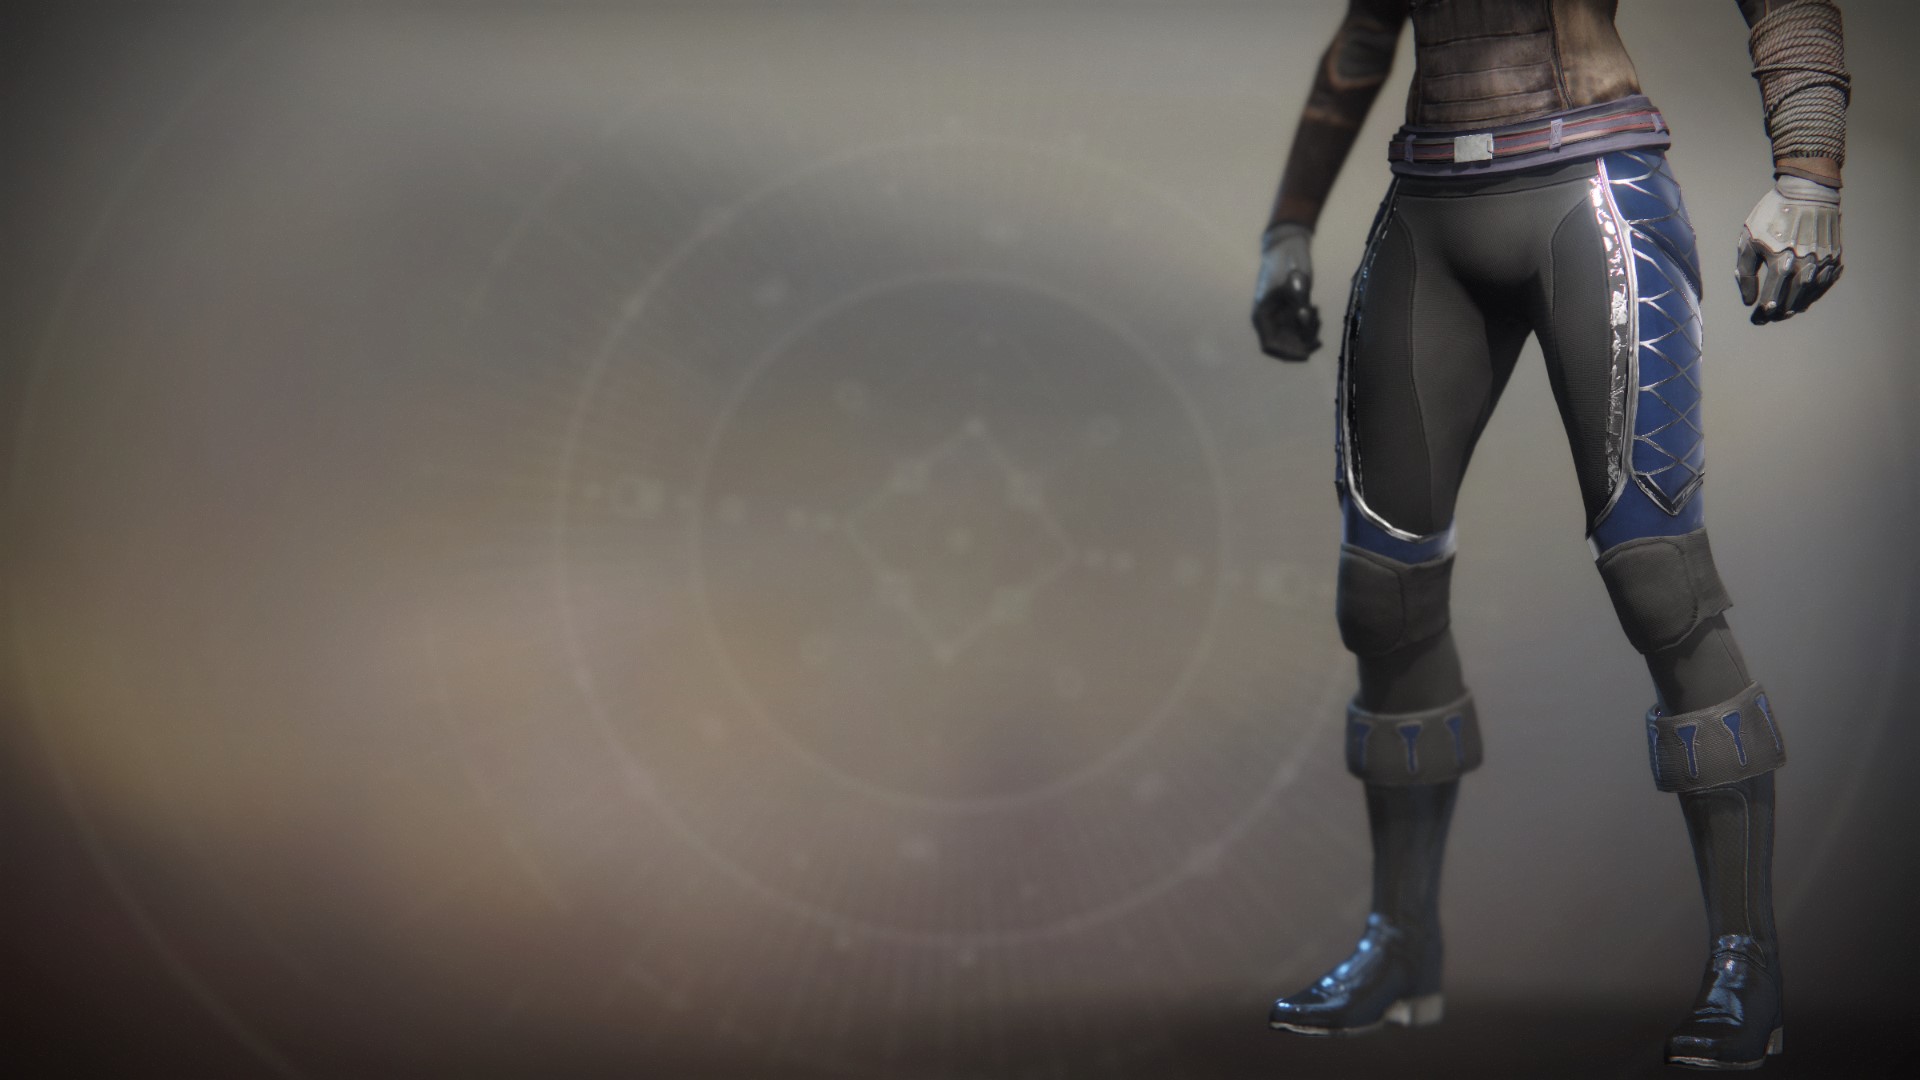 An in-game render of the Legs of Optimacy.